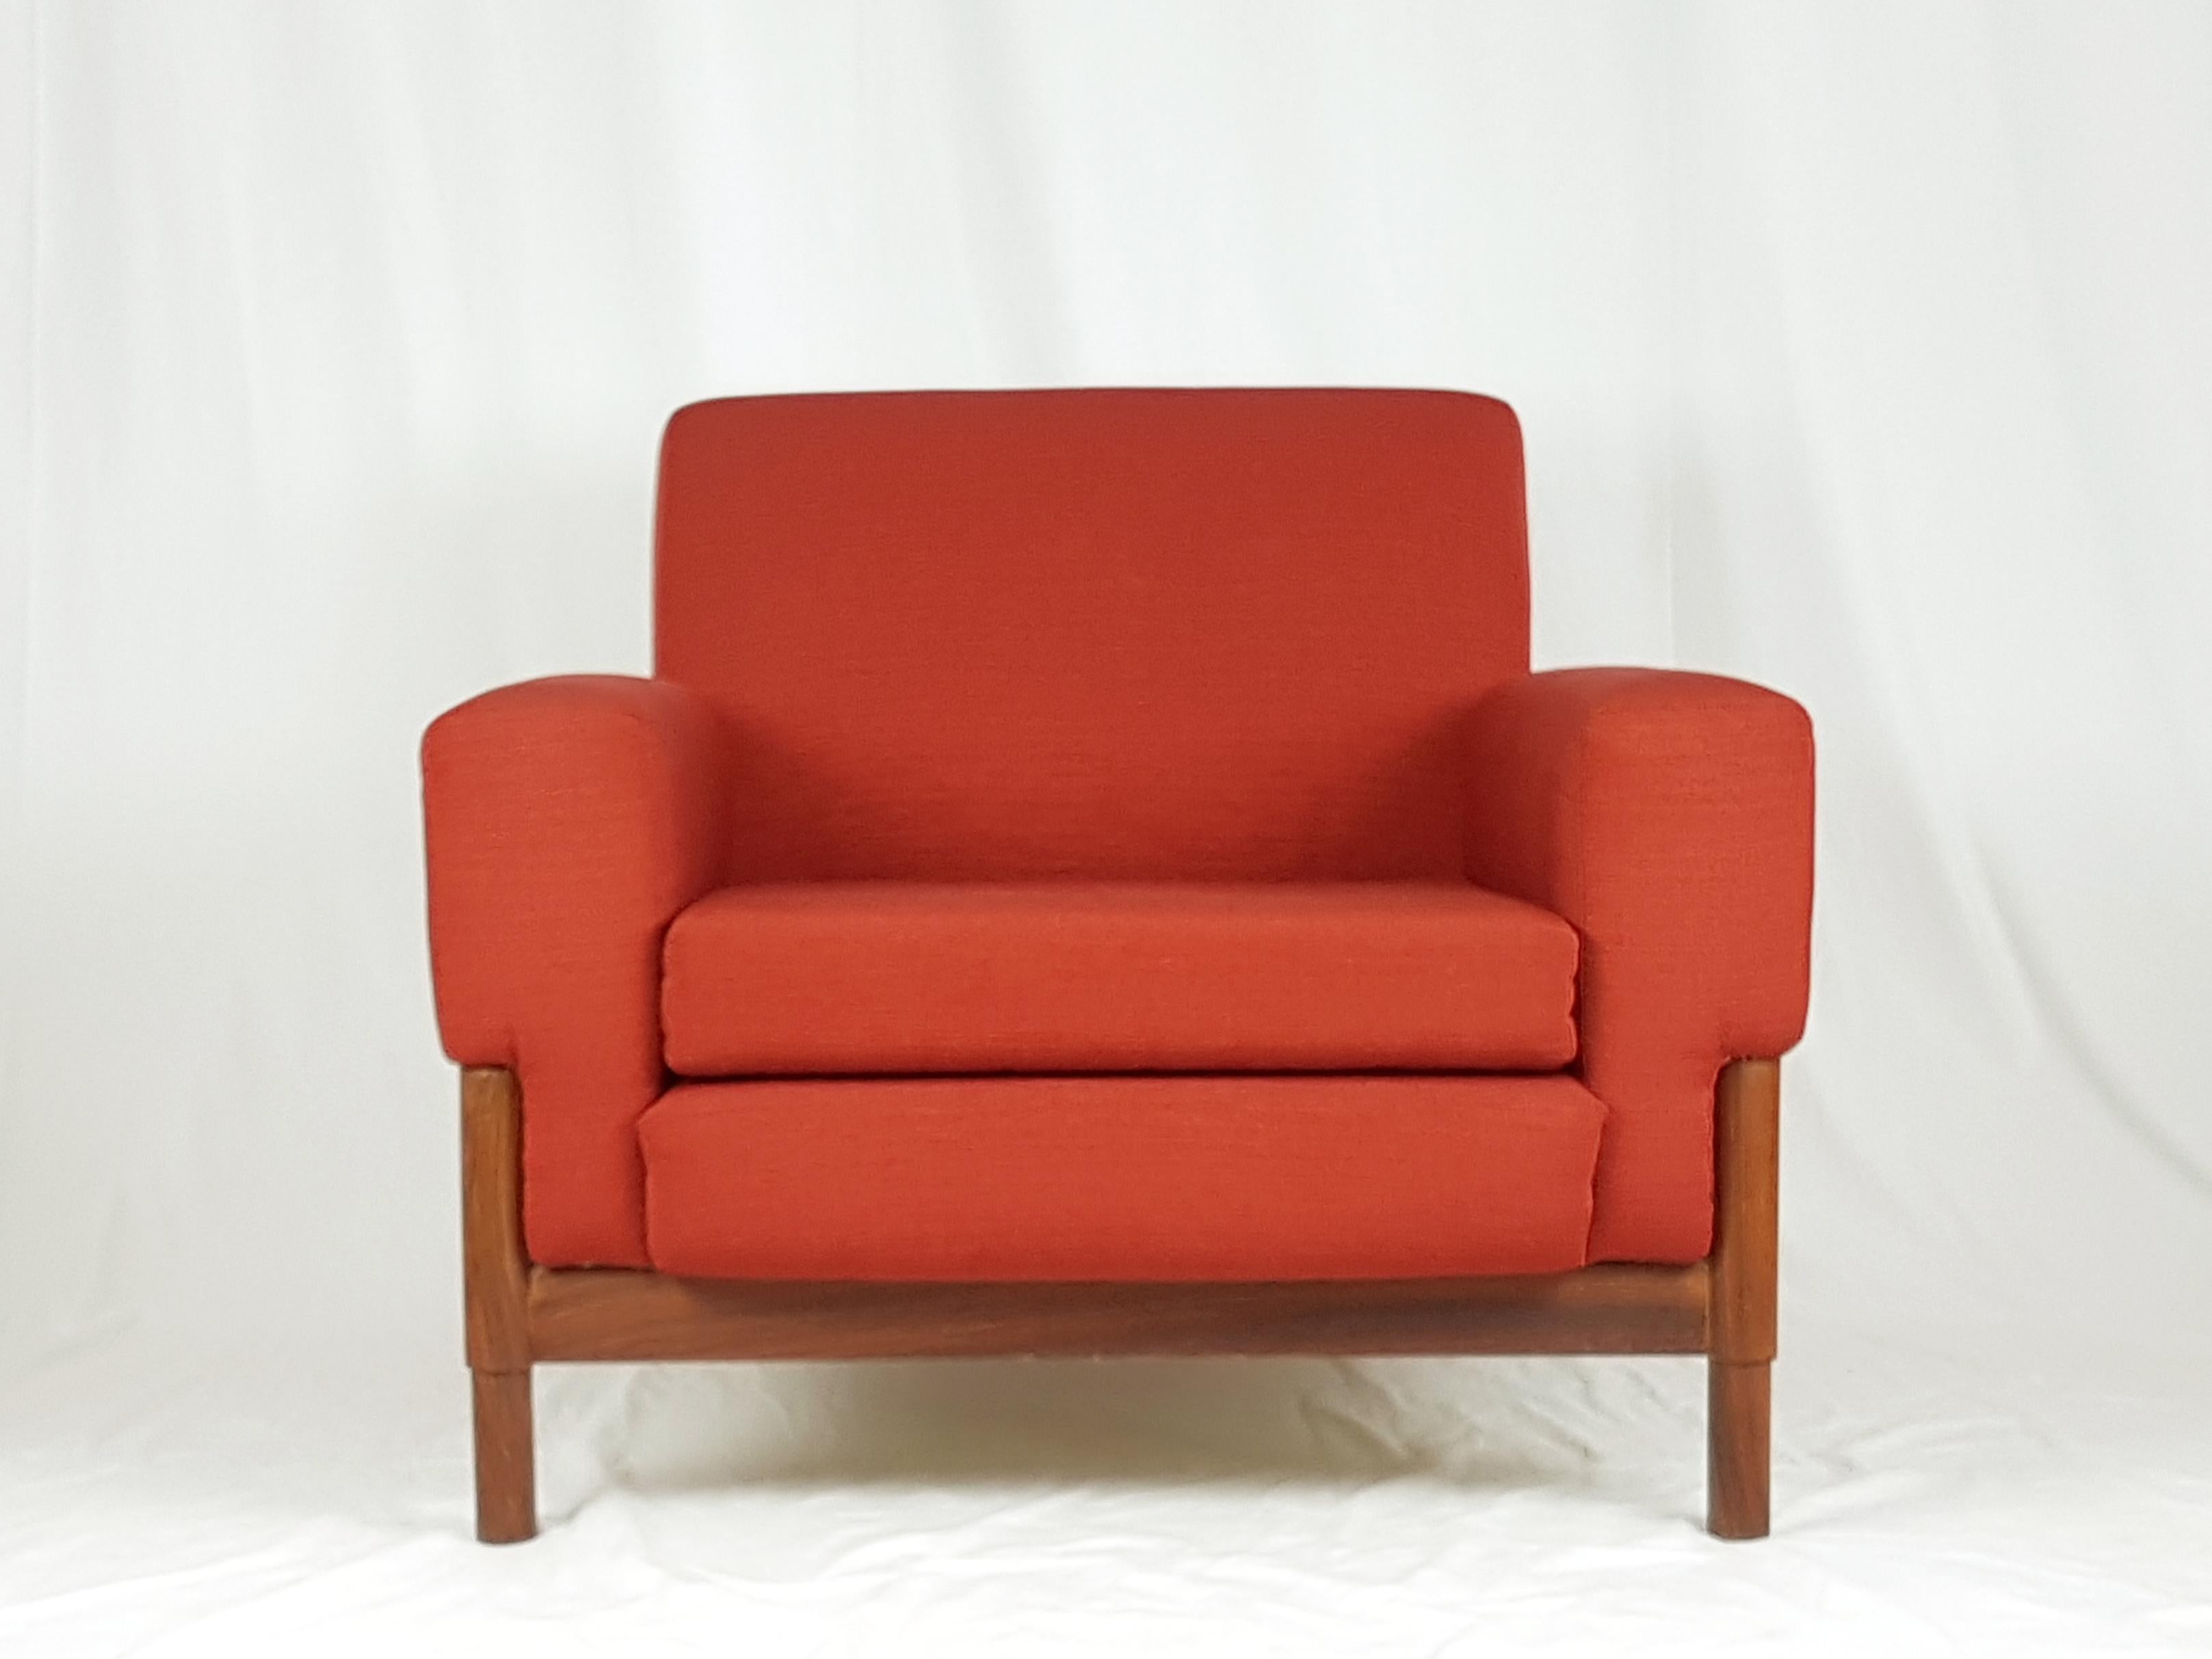 Pair of Wood & Brick Red Fabric 1960 Armchair by S. Saporiti for F.Lli Saporiti For Sale 8